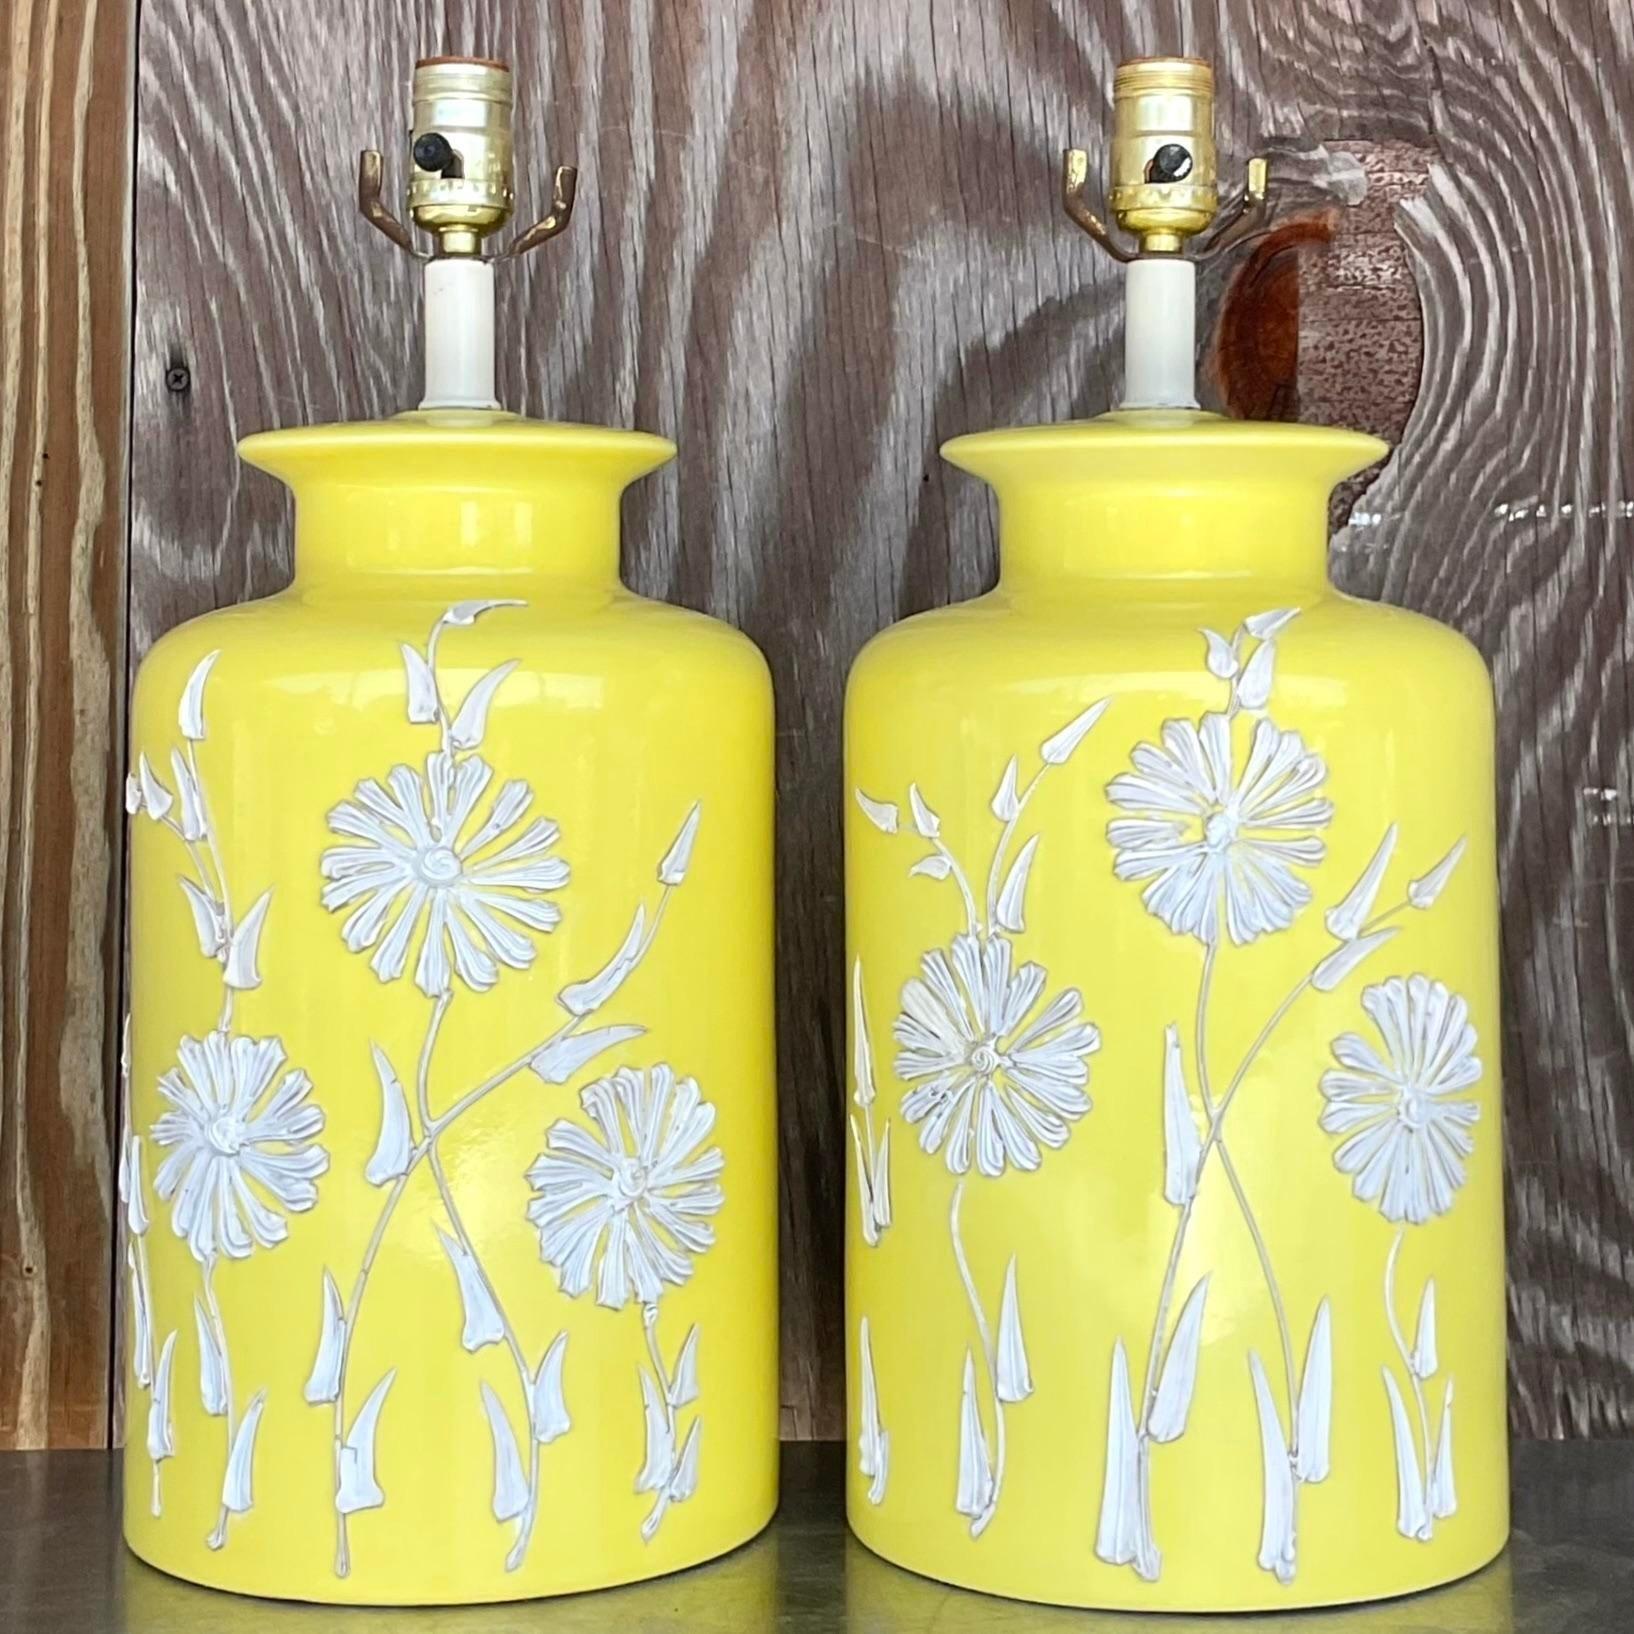 American Vintage Boho Glazed Ceramic Icing Flower Lamps - a Pair For Sale